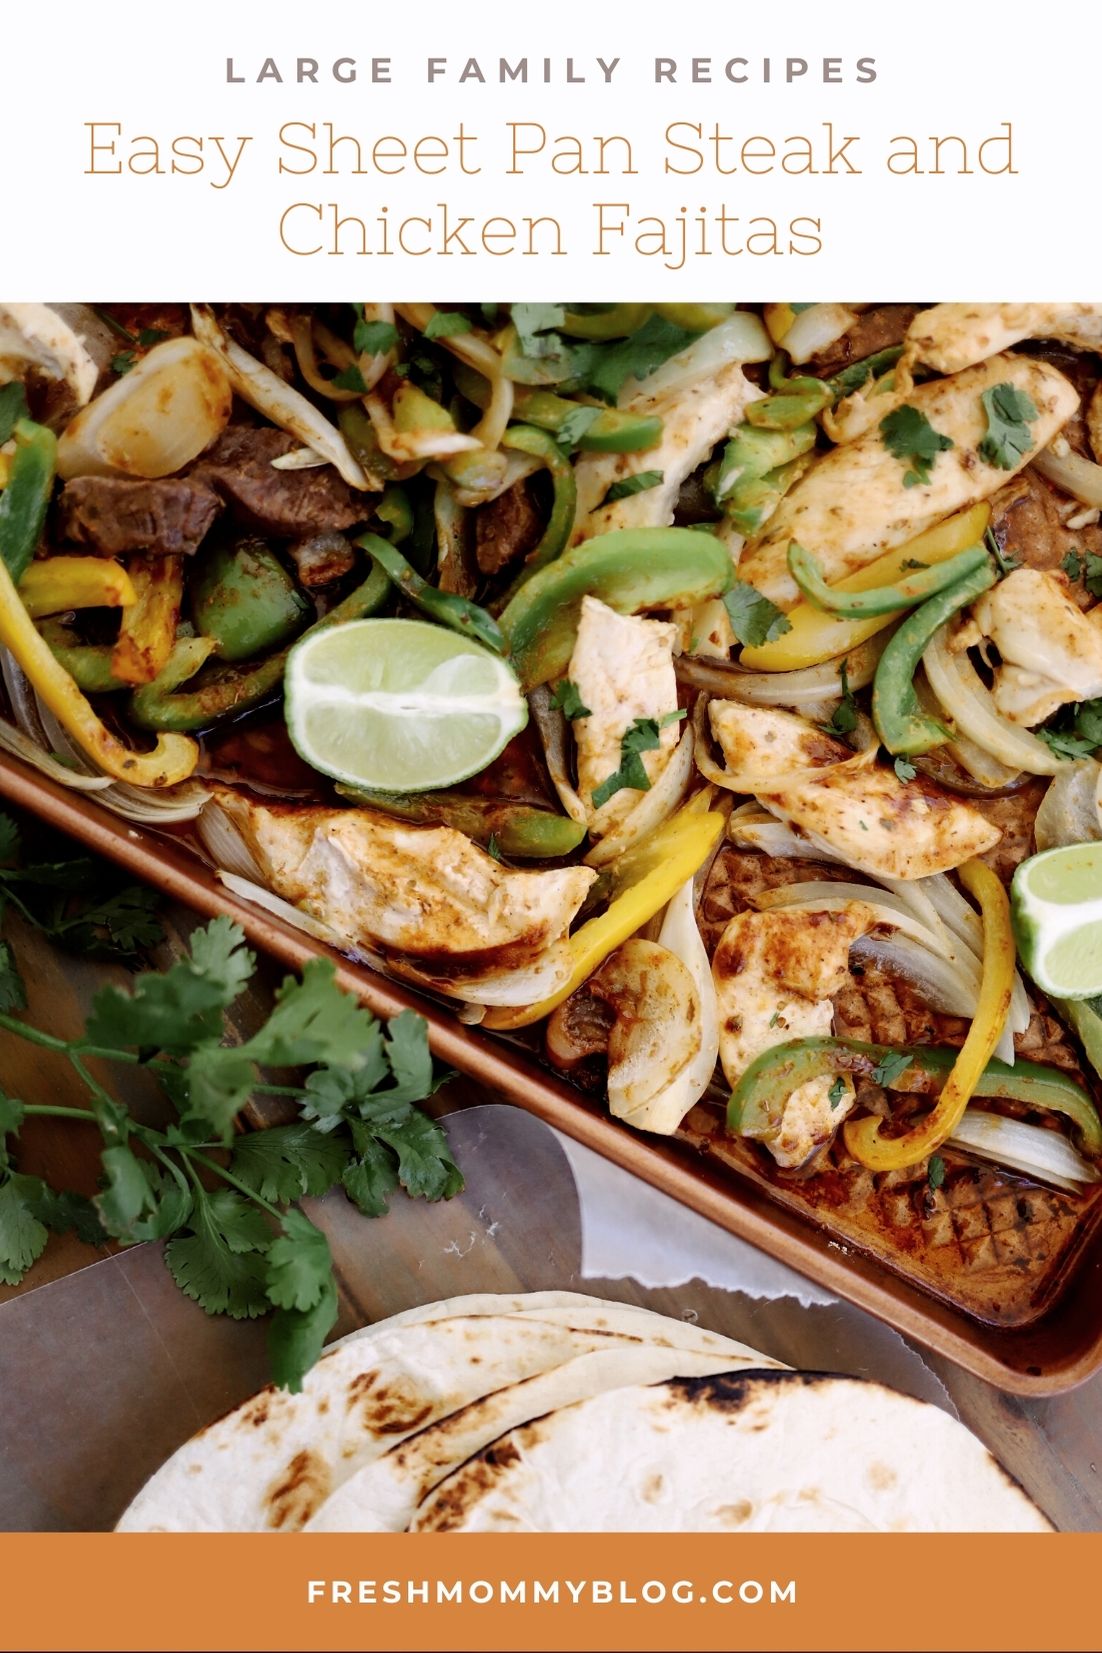 Steak and Chicken Fajitas: Sheet Pan Dinners for a Large Family from top US Lifestyle Blogger Tabitha Blue of Fresh Mommy Blog.